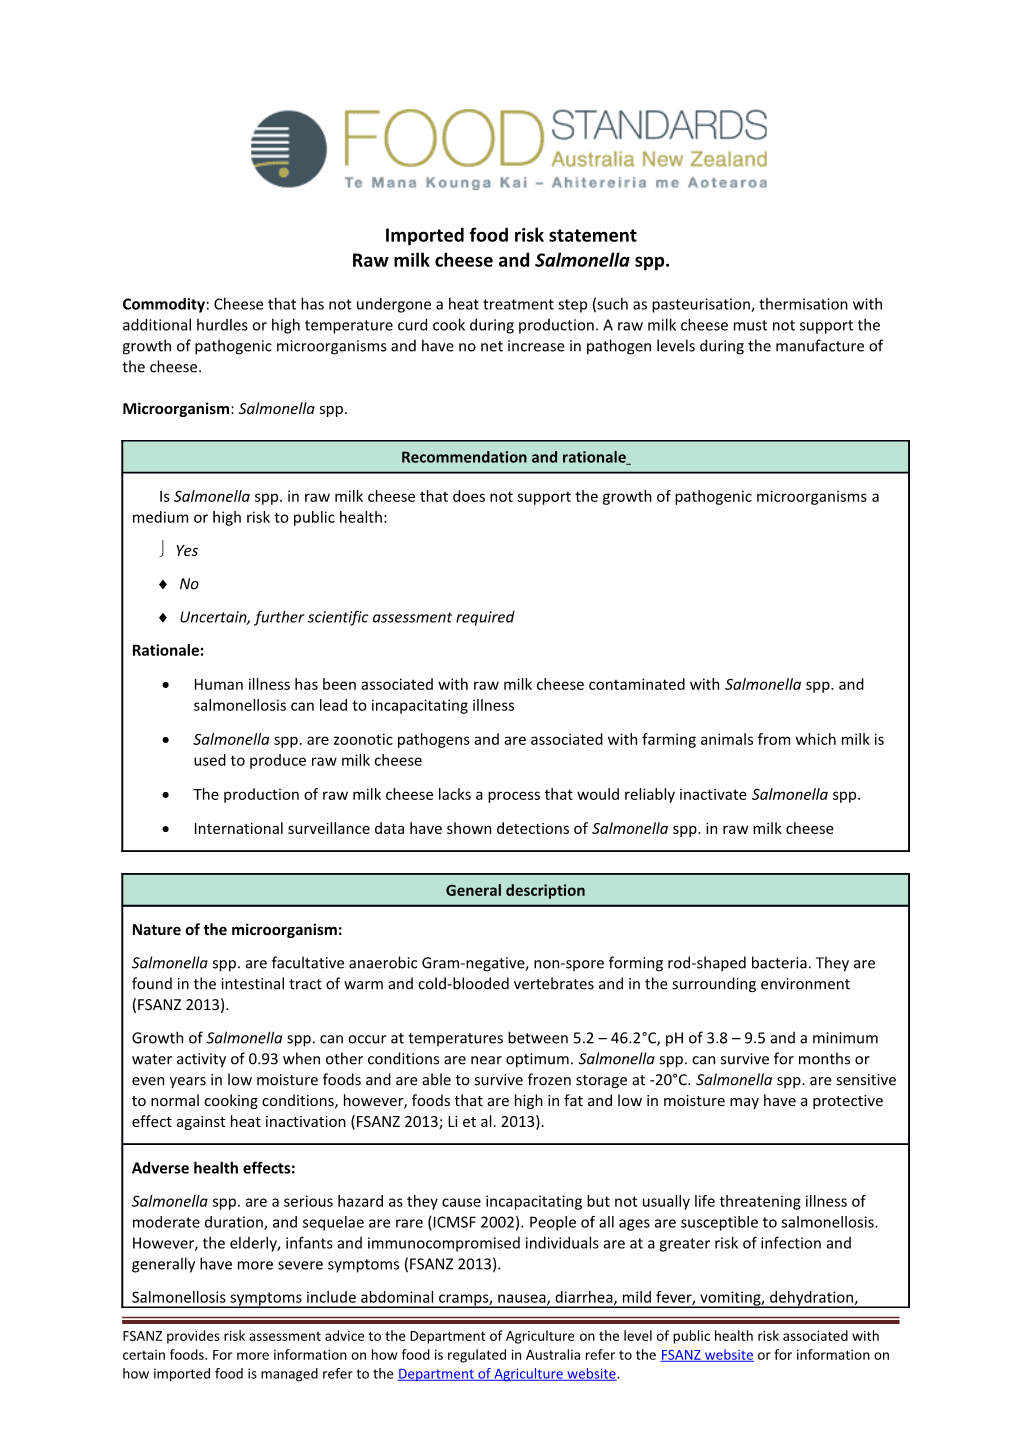 Imported Food Risk Statement s3